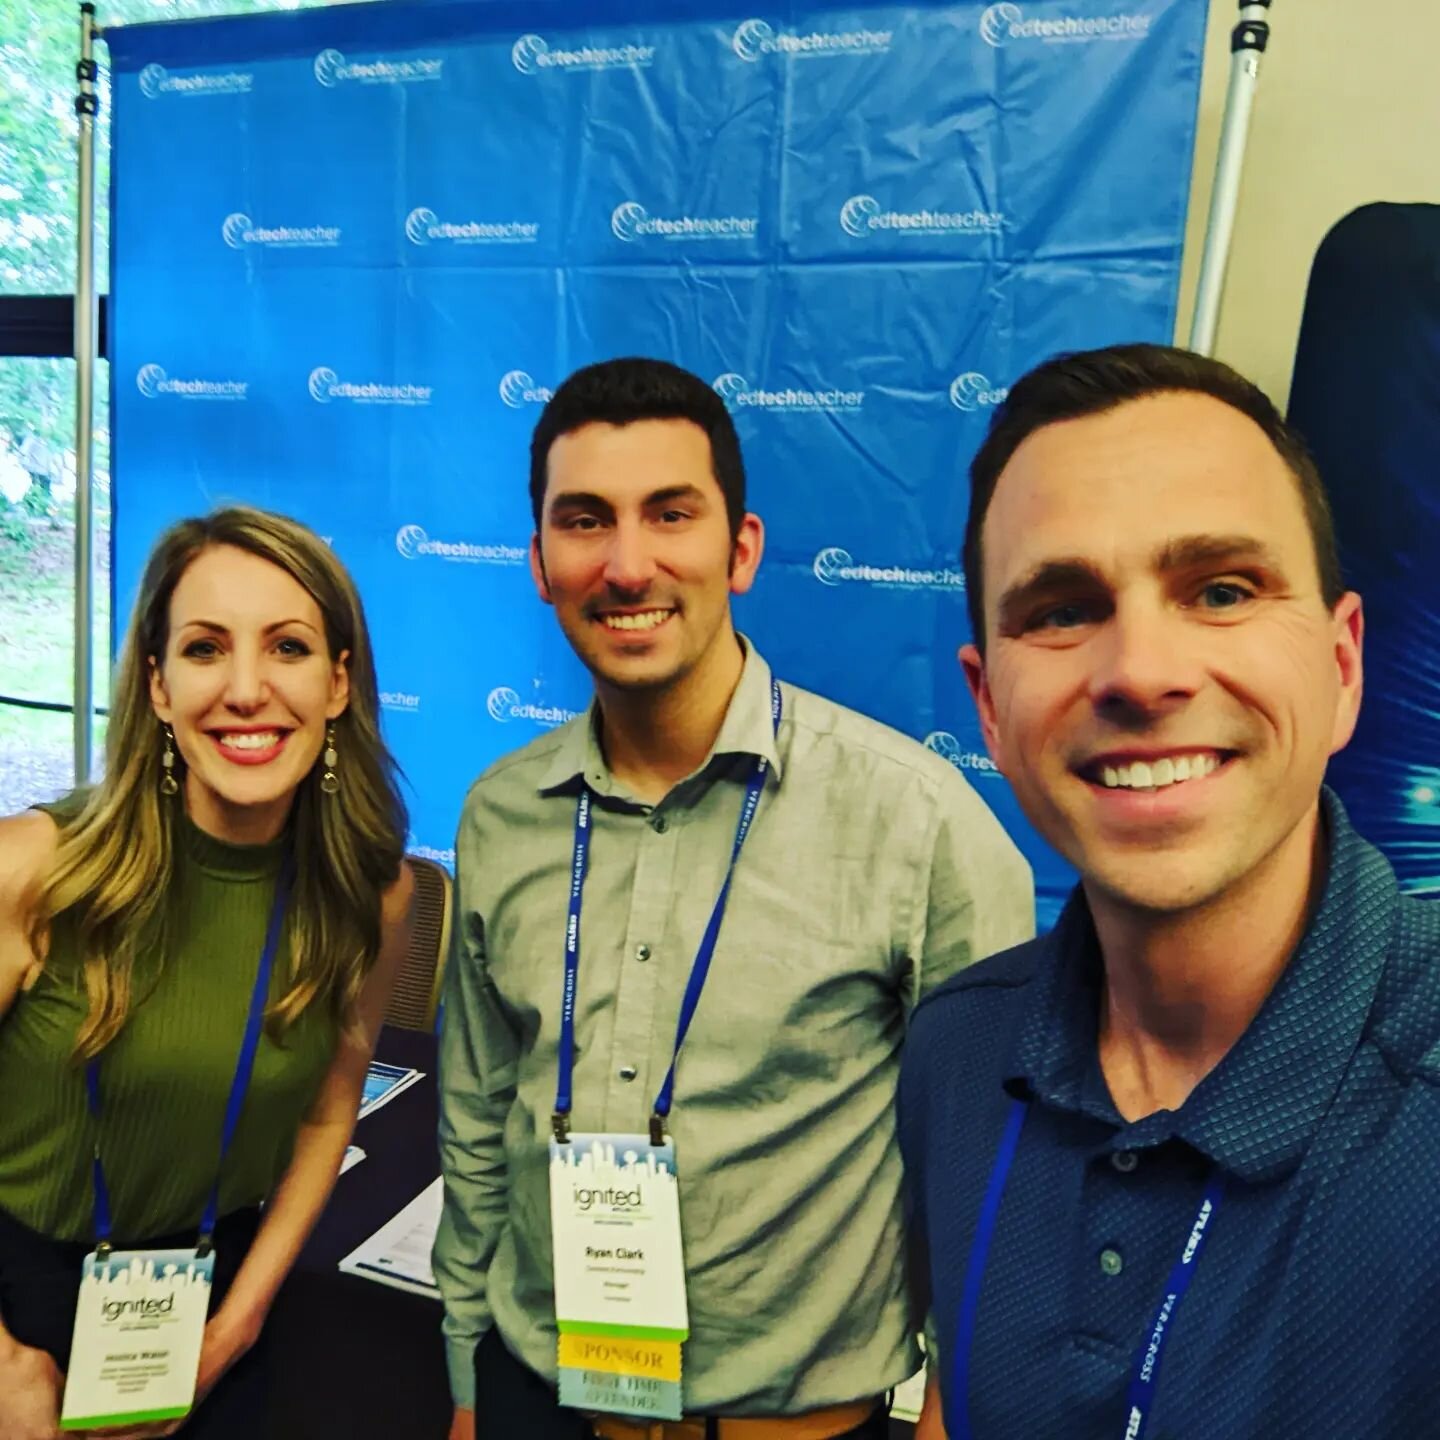 Enjoying my time at #AtlisIgnited!  Collaborating with the team @goformative in our @edtechteacher21 booth, such amazing people and a powerful platform! 

As usual, a top notch keynote delivered this morning by @rculatta of @isteconnects. 

And our n